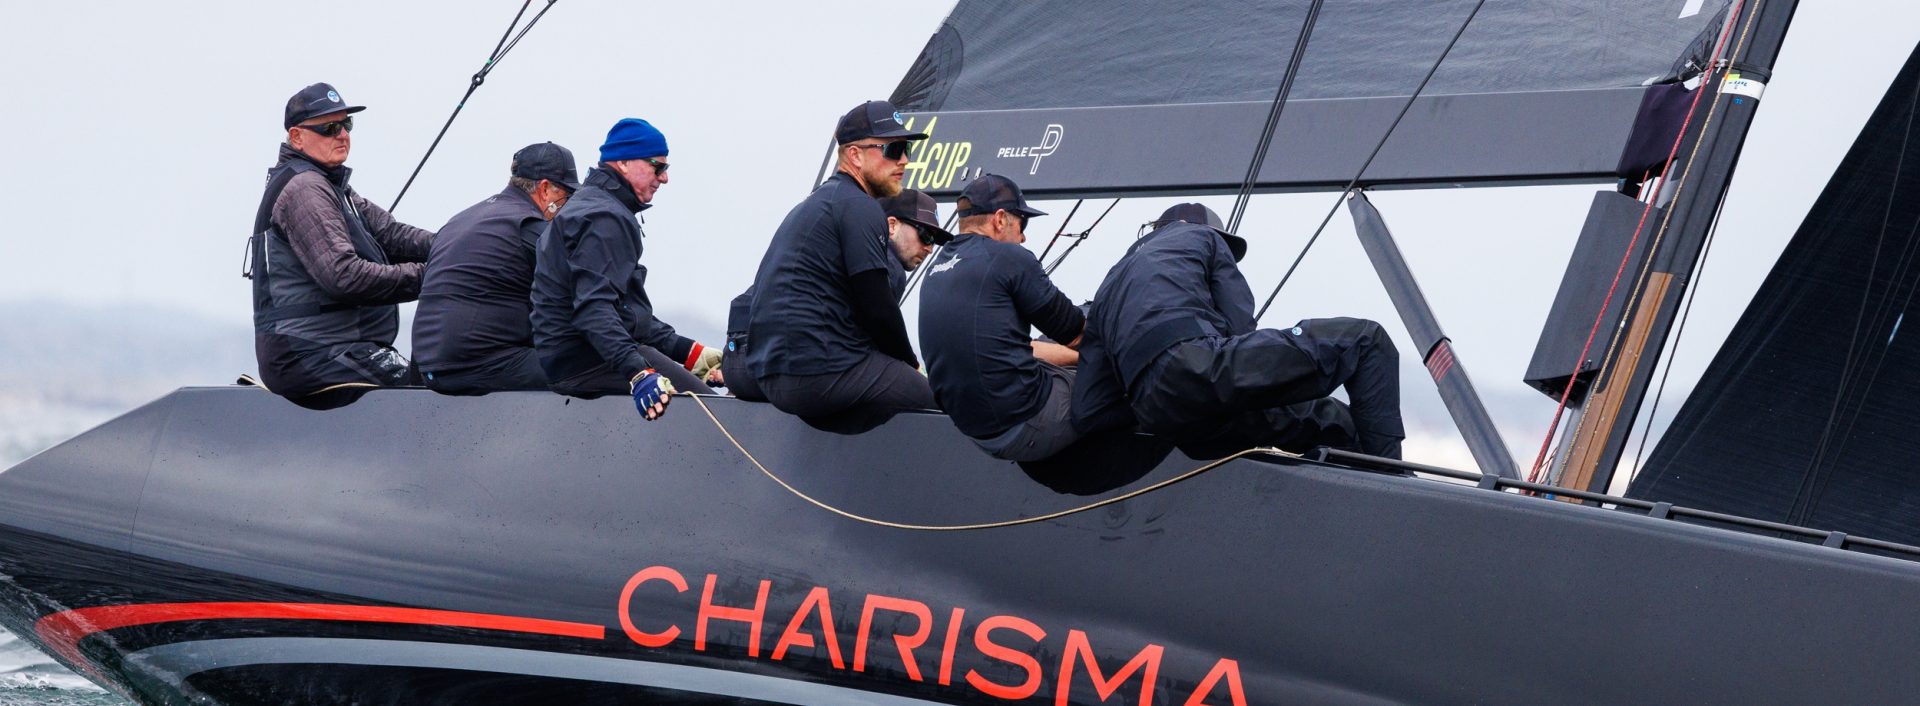 Top five within two points at half way stage of 44Cup Marstrand